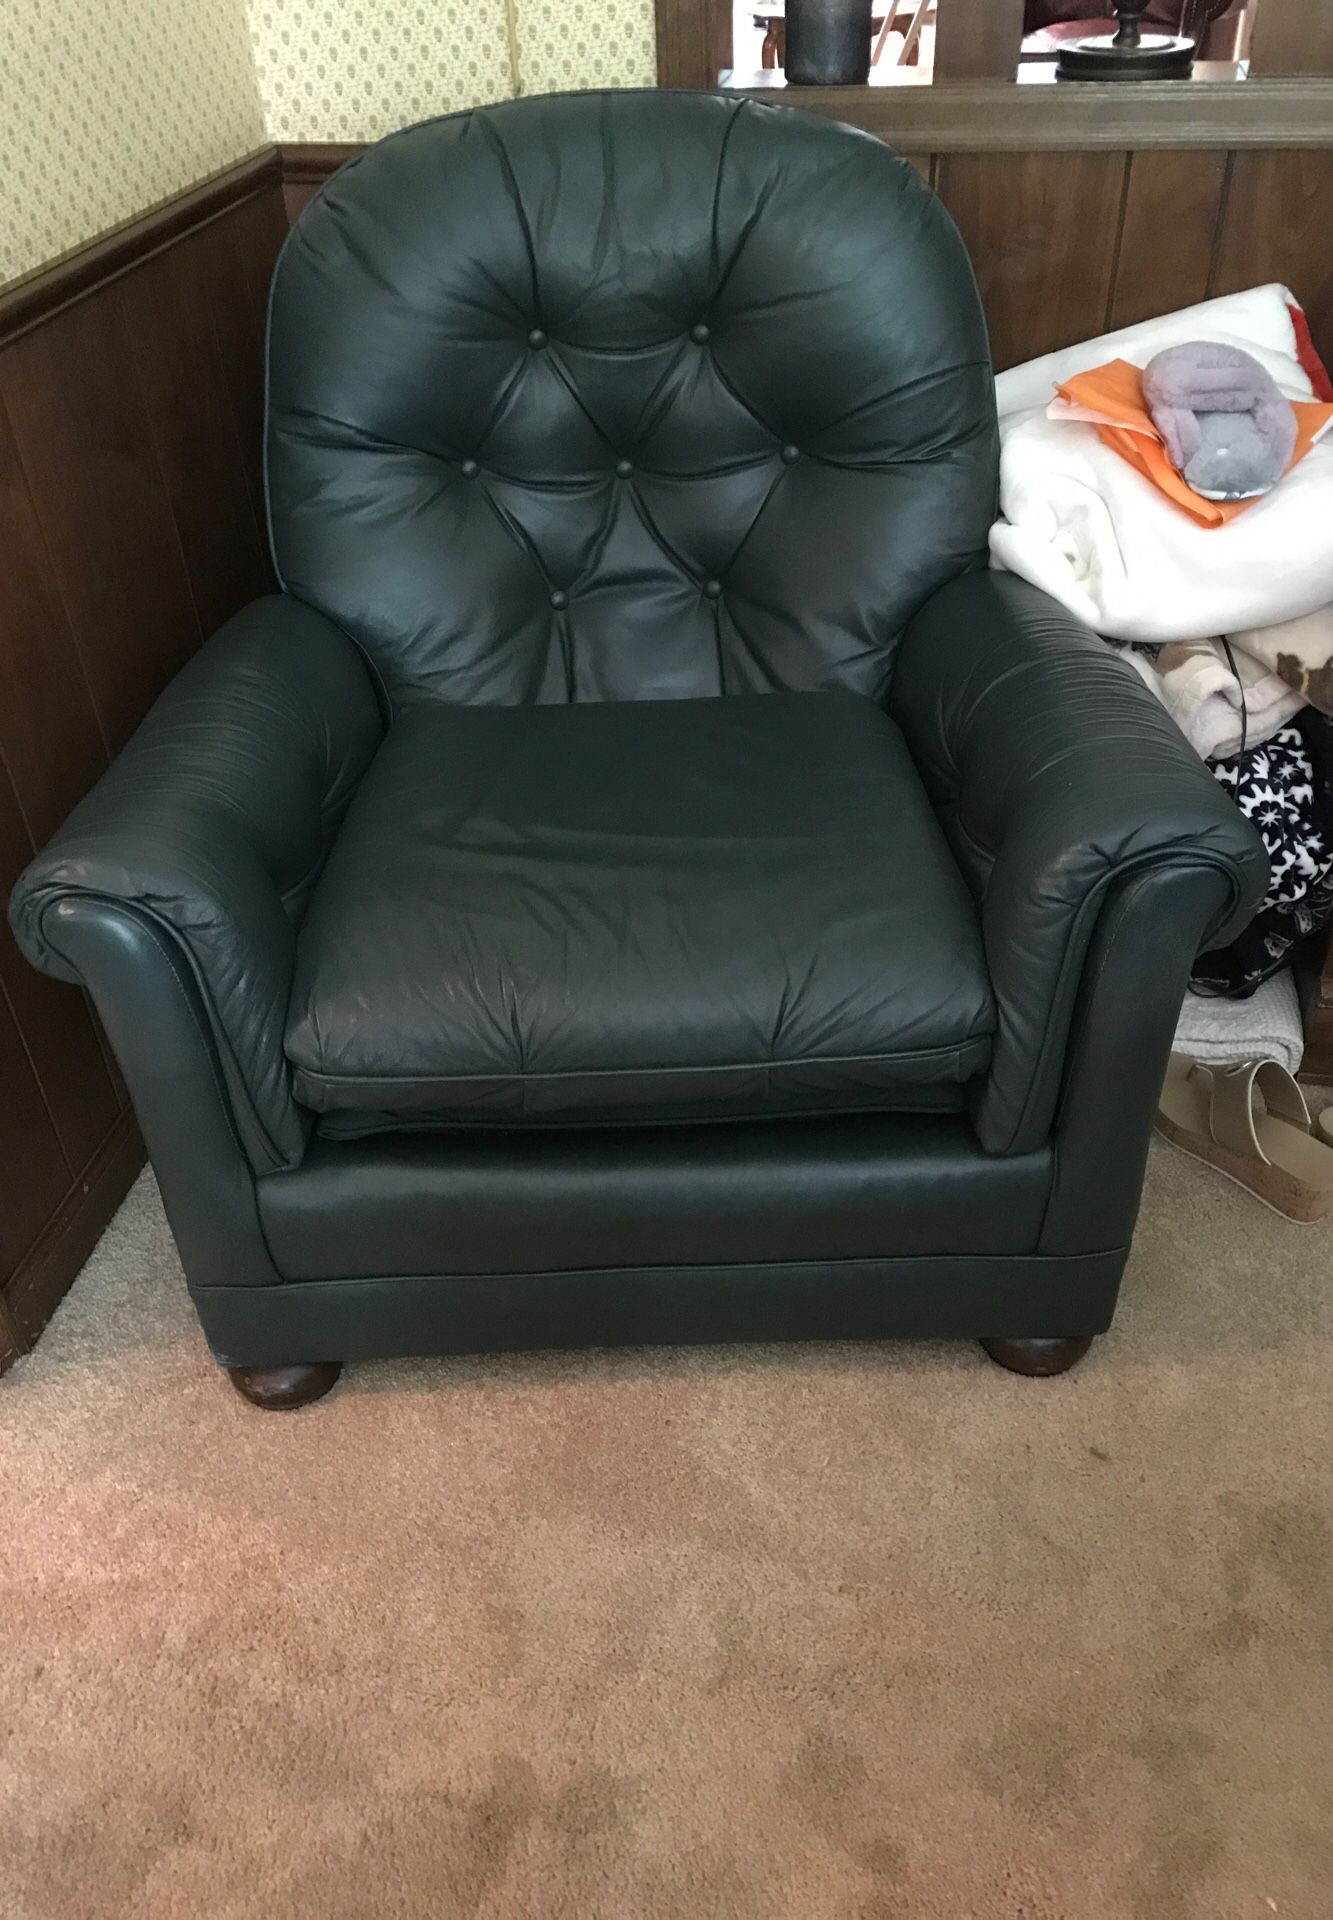 Leather chair, like new